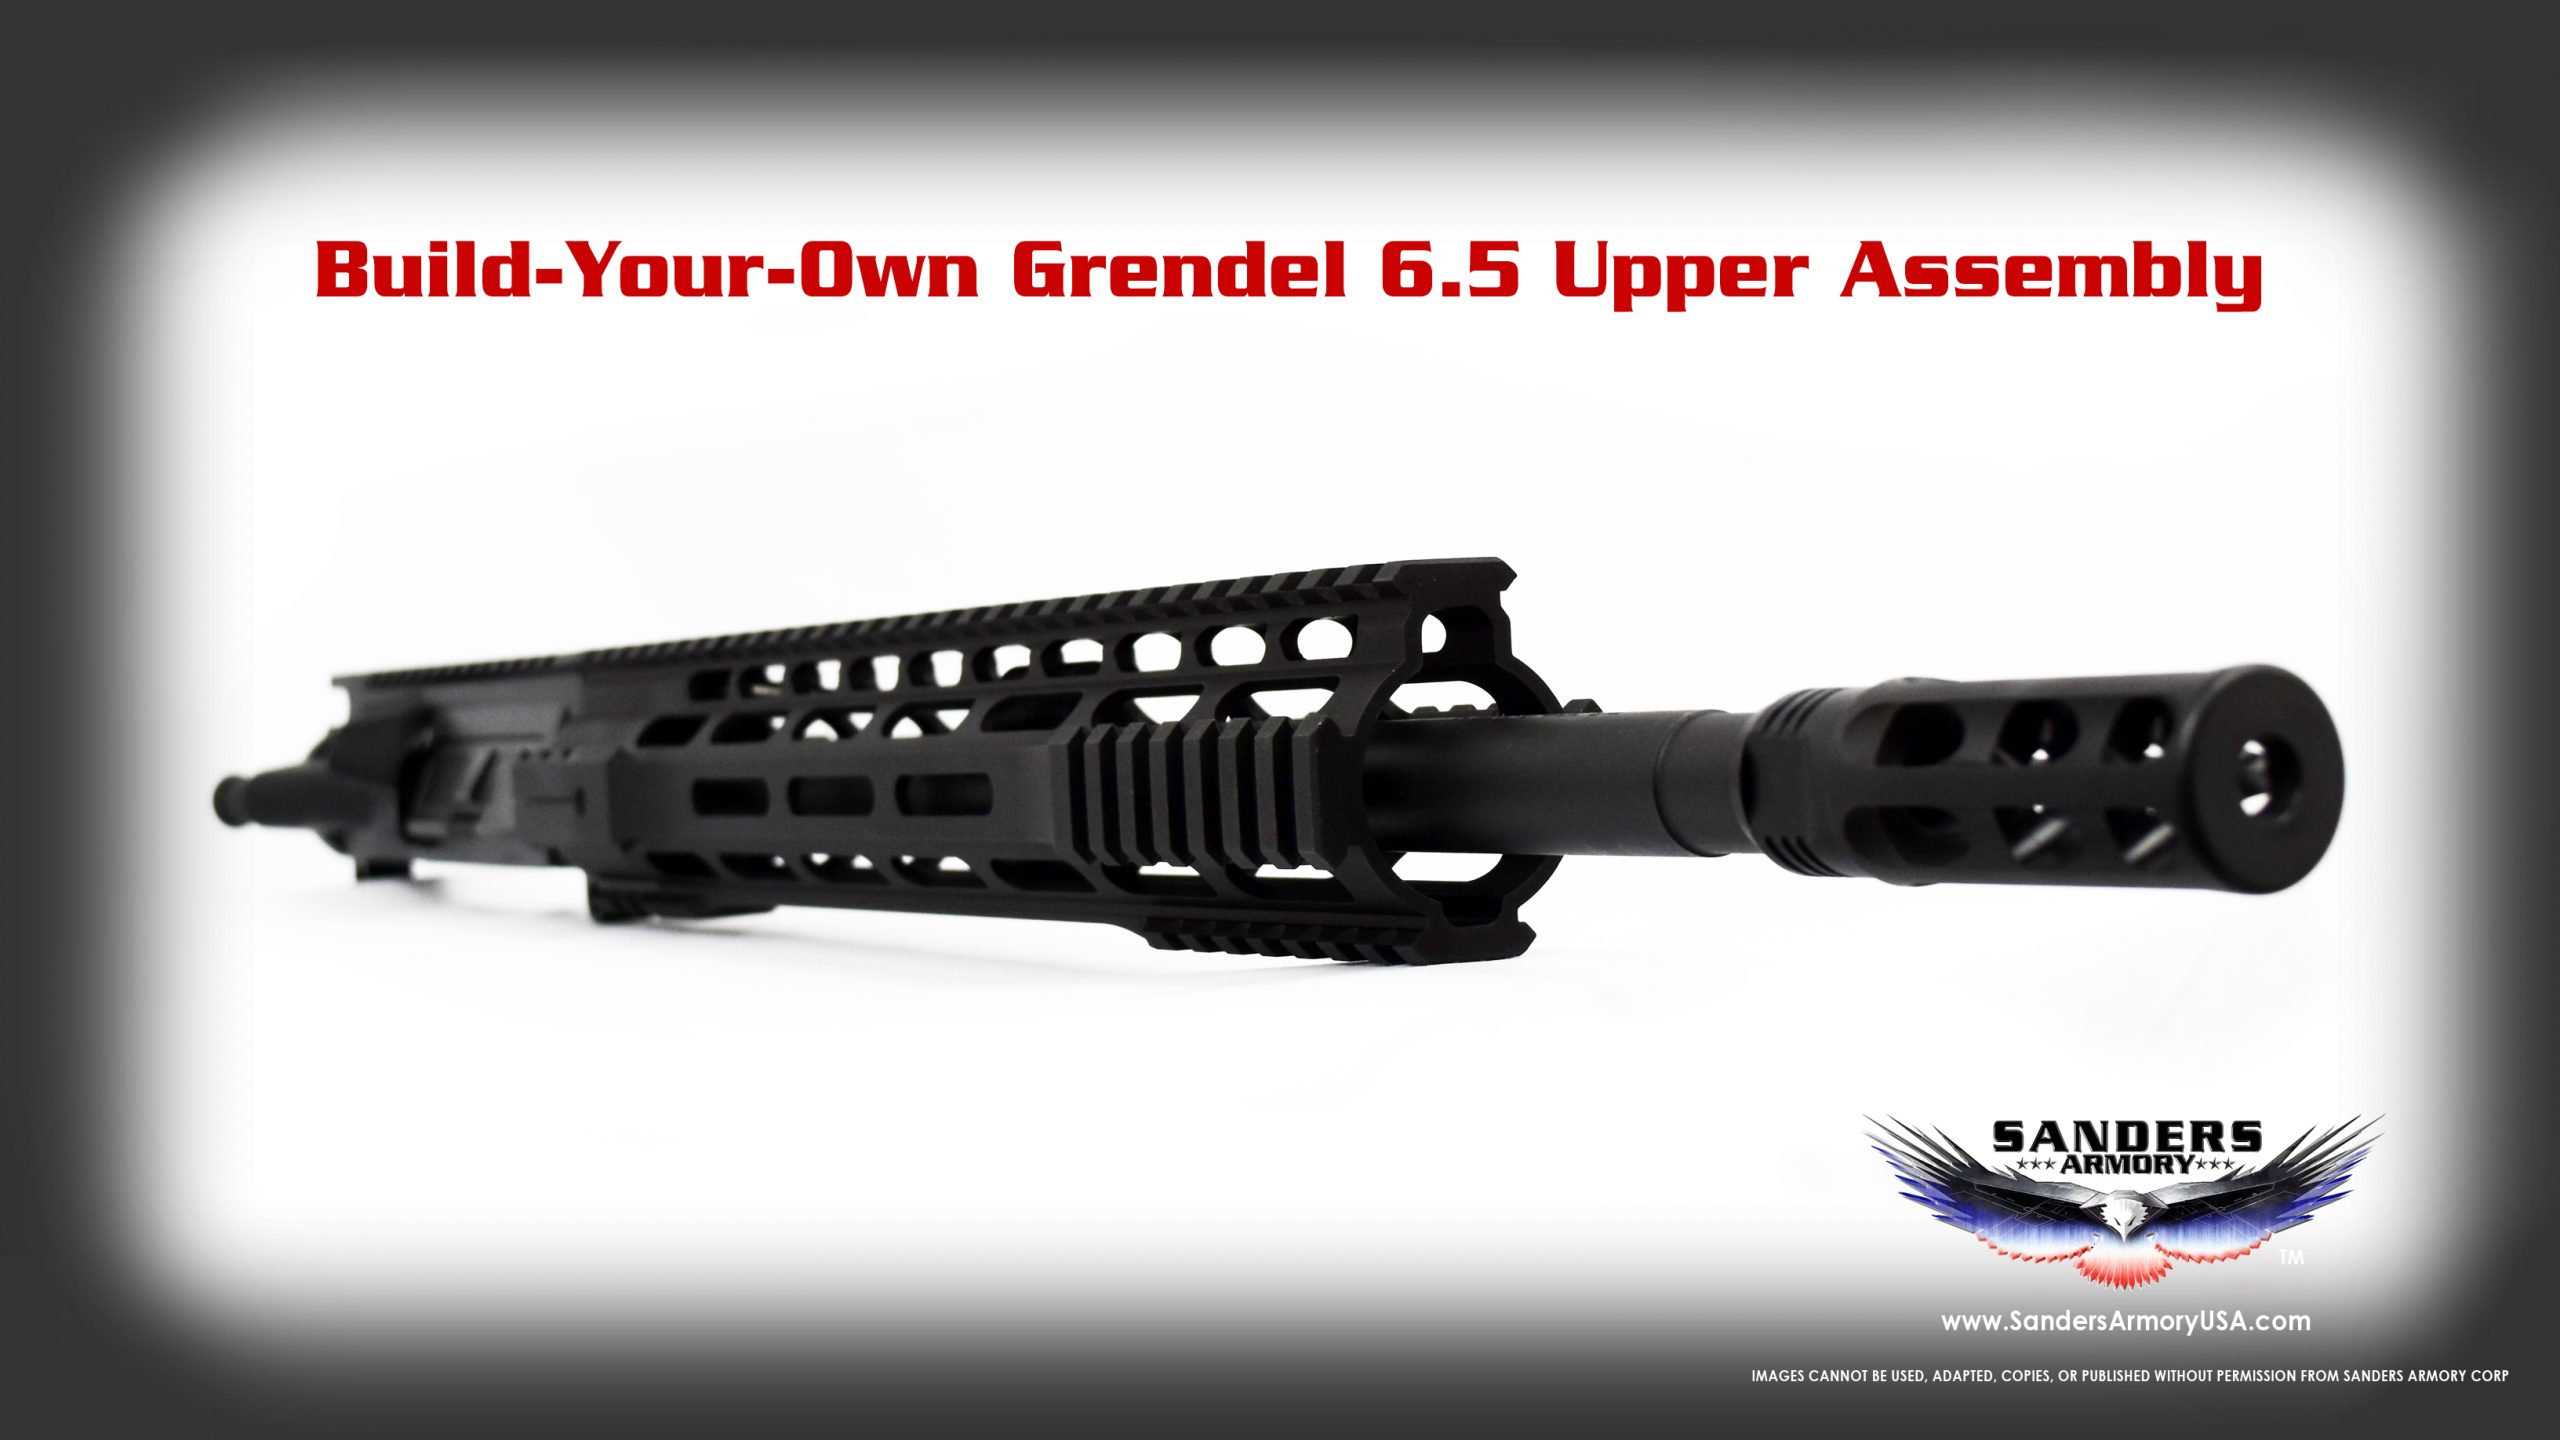 Sanders Armory Build Your Own 6.5 Grendel Upper Assembly